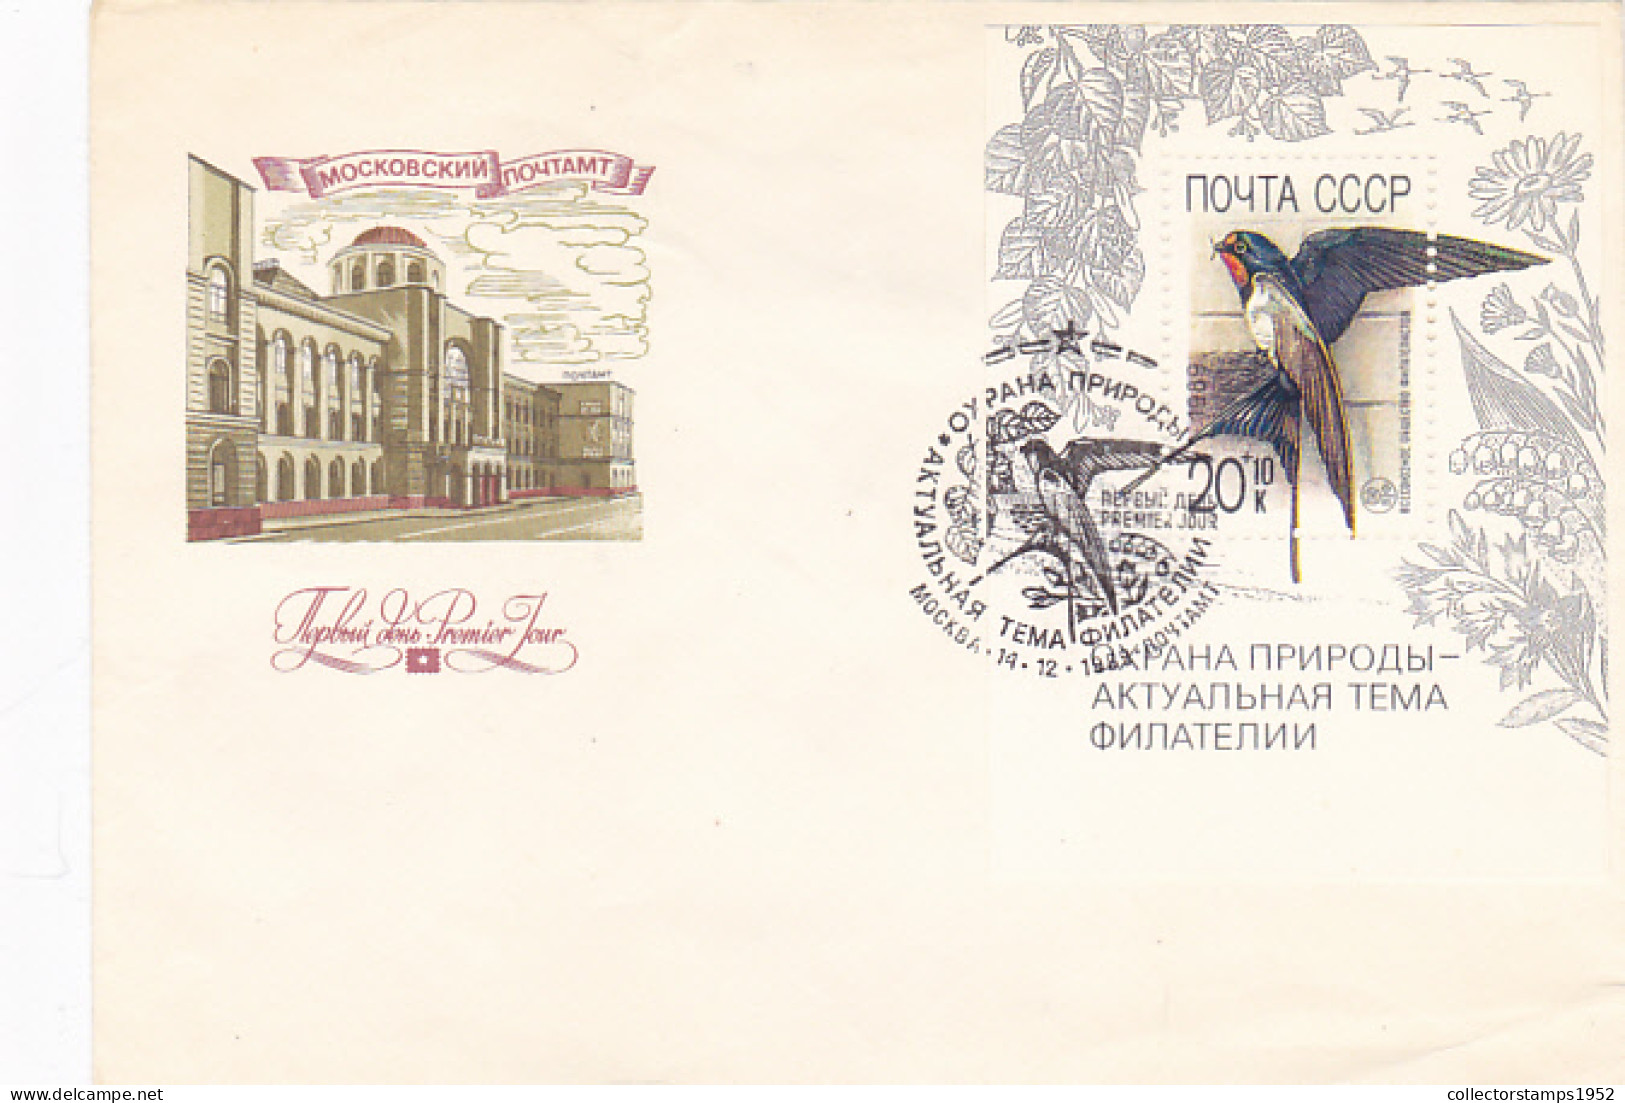 SWALLOW, BIRDS, ANIMALS, SPECIAL POSTMARK AND STAMP SHEET ON MOSCOW POST OFFICE COVER FDC, 1989, RUSSIA-USSR - Hirondelles